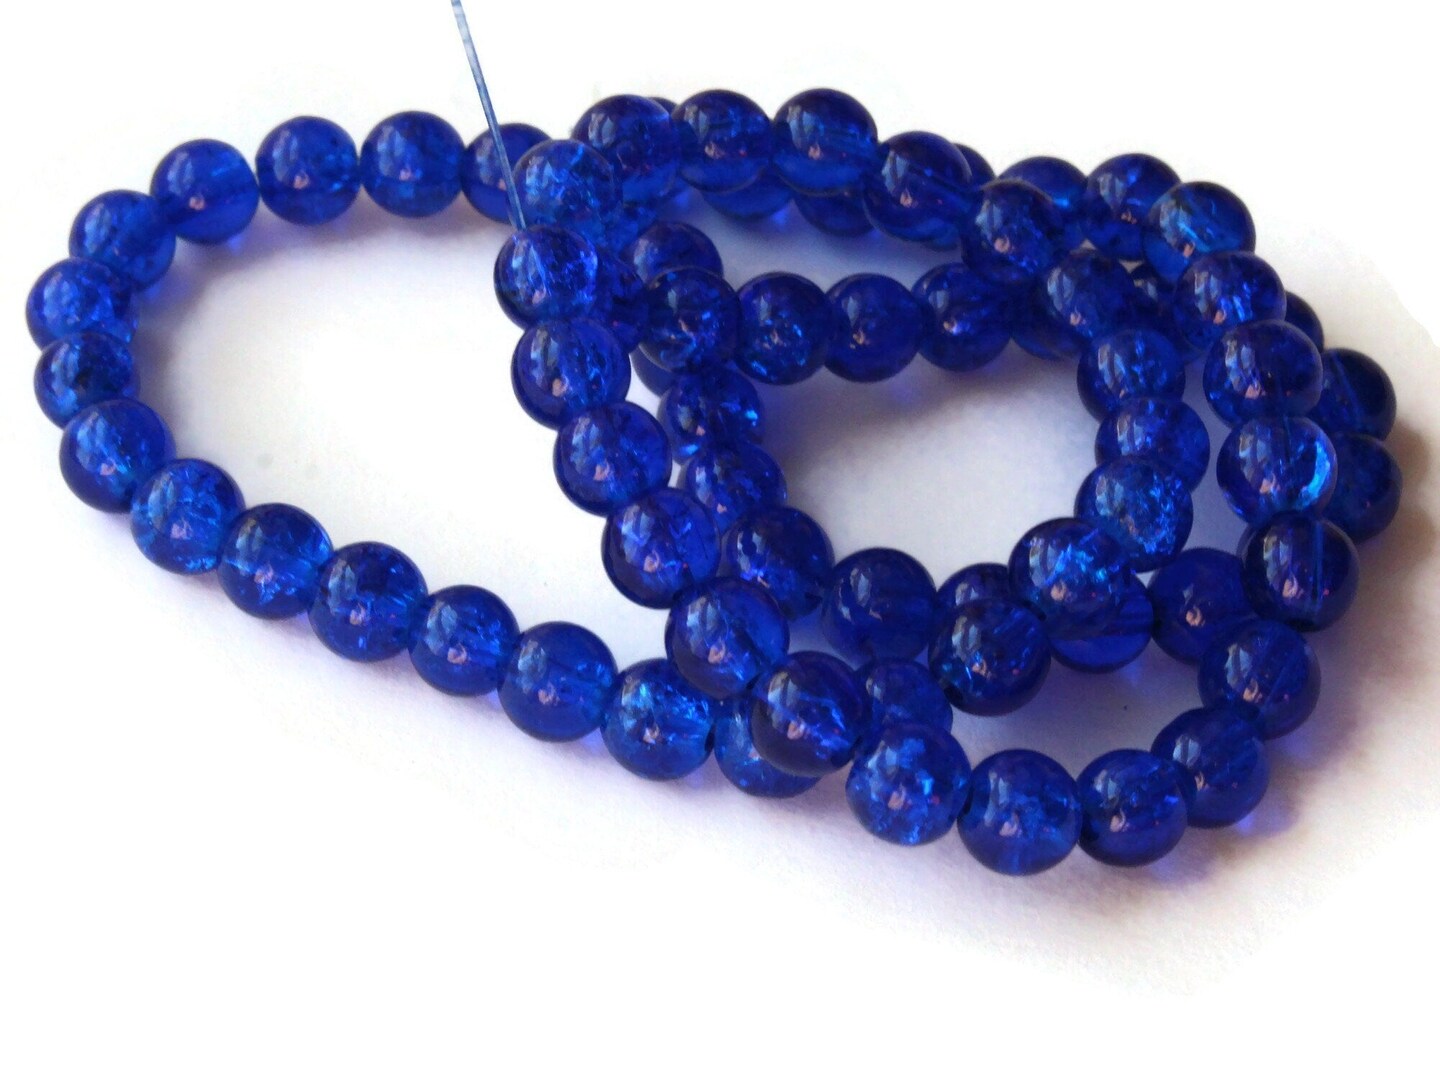 6mm Royal Blue Crackle Glass Round Beads